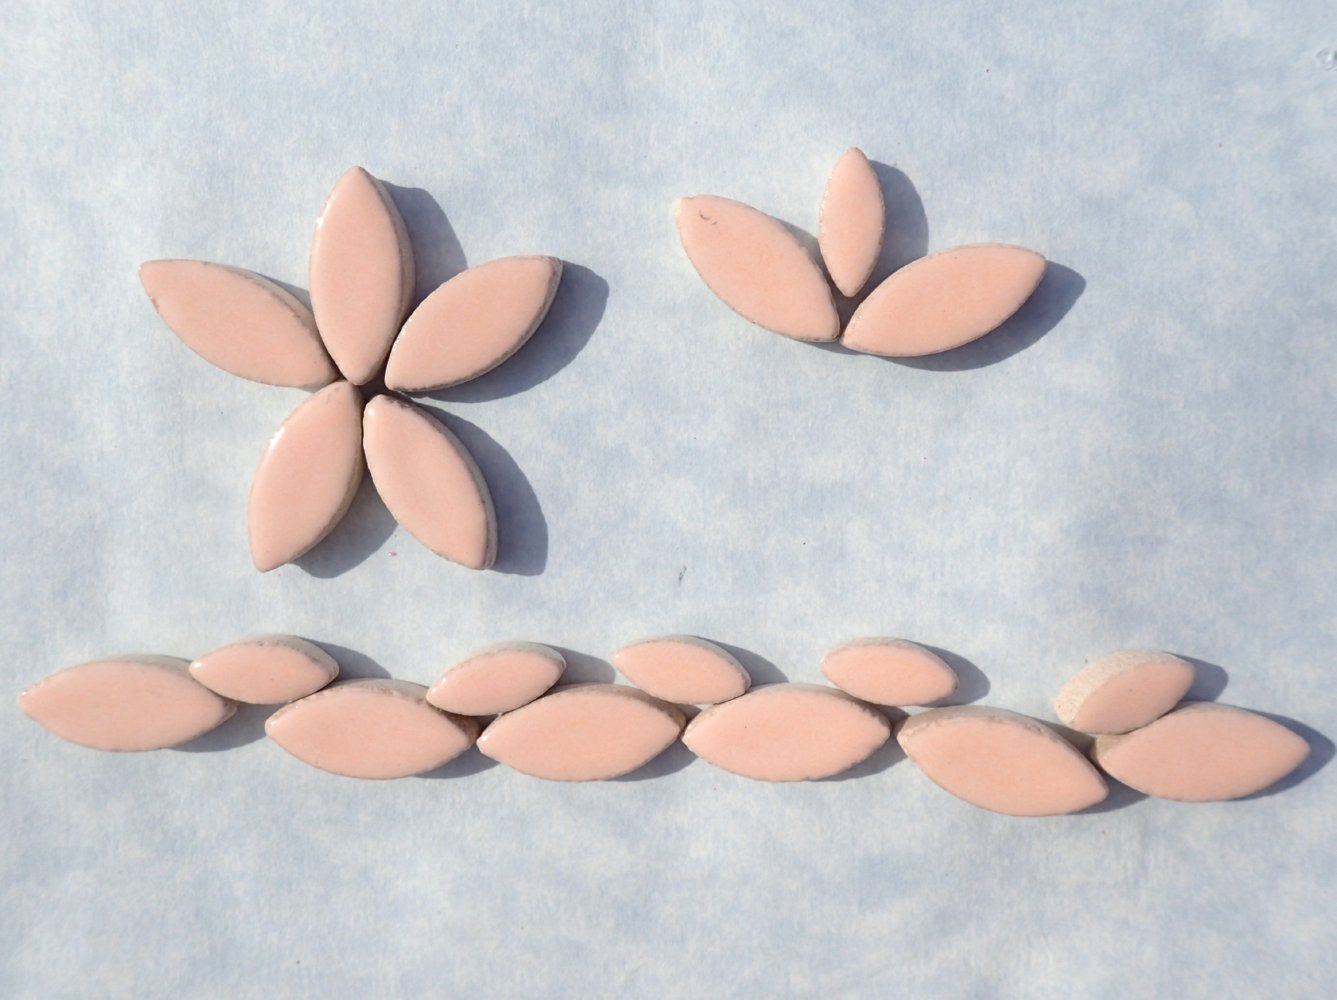 Peach Petals Mosaic Tiles - 50g Ceramic Leaves in Mix of 2 Sizes 1/2" and 3/4" - Pale Light Orange